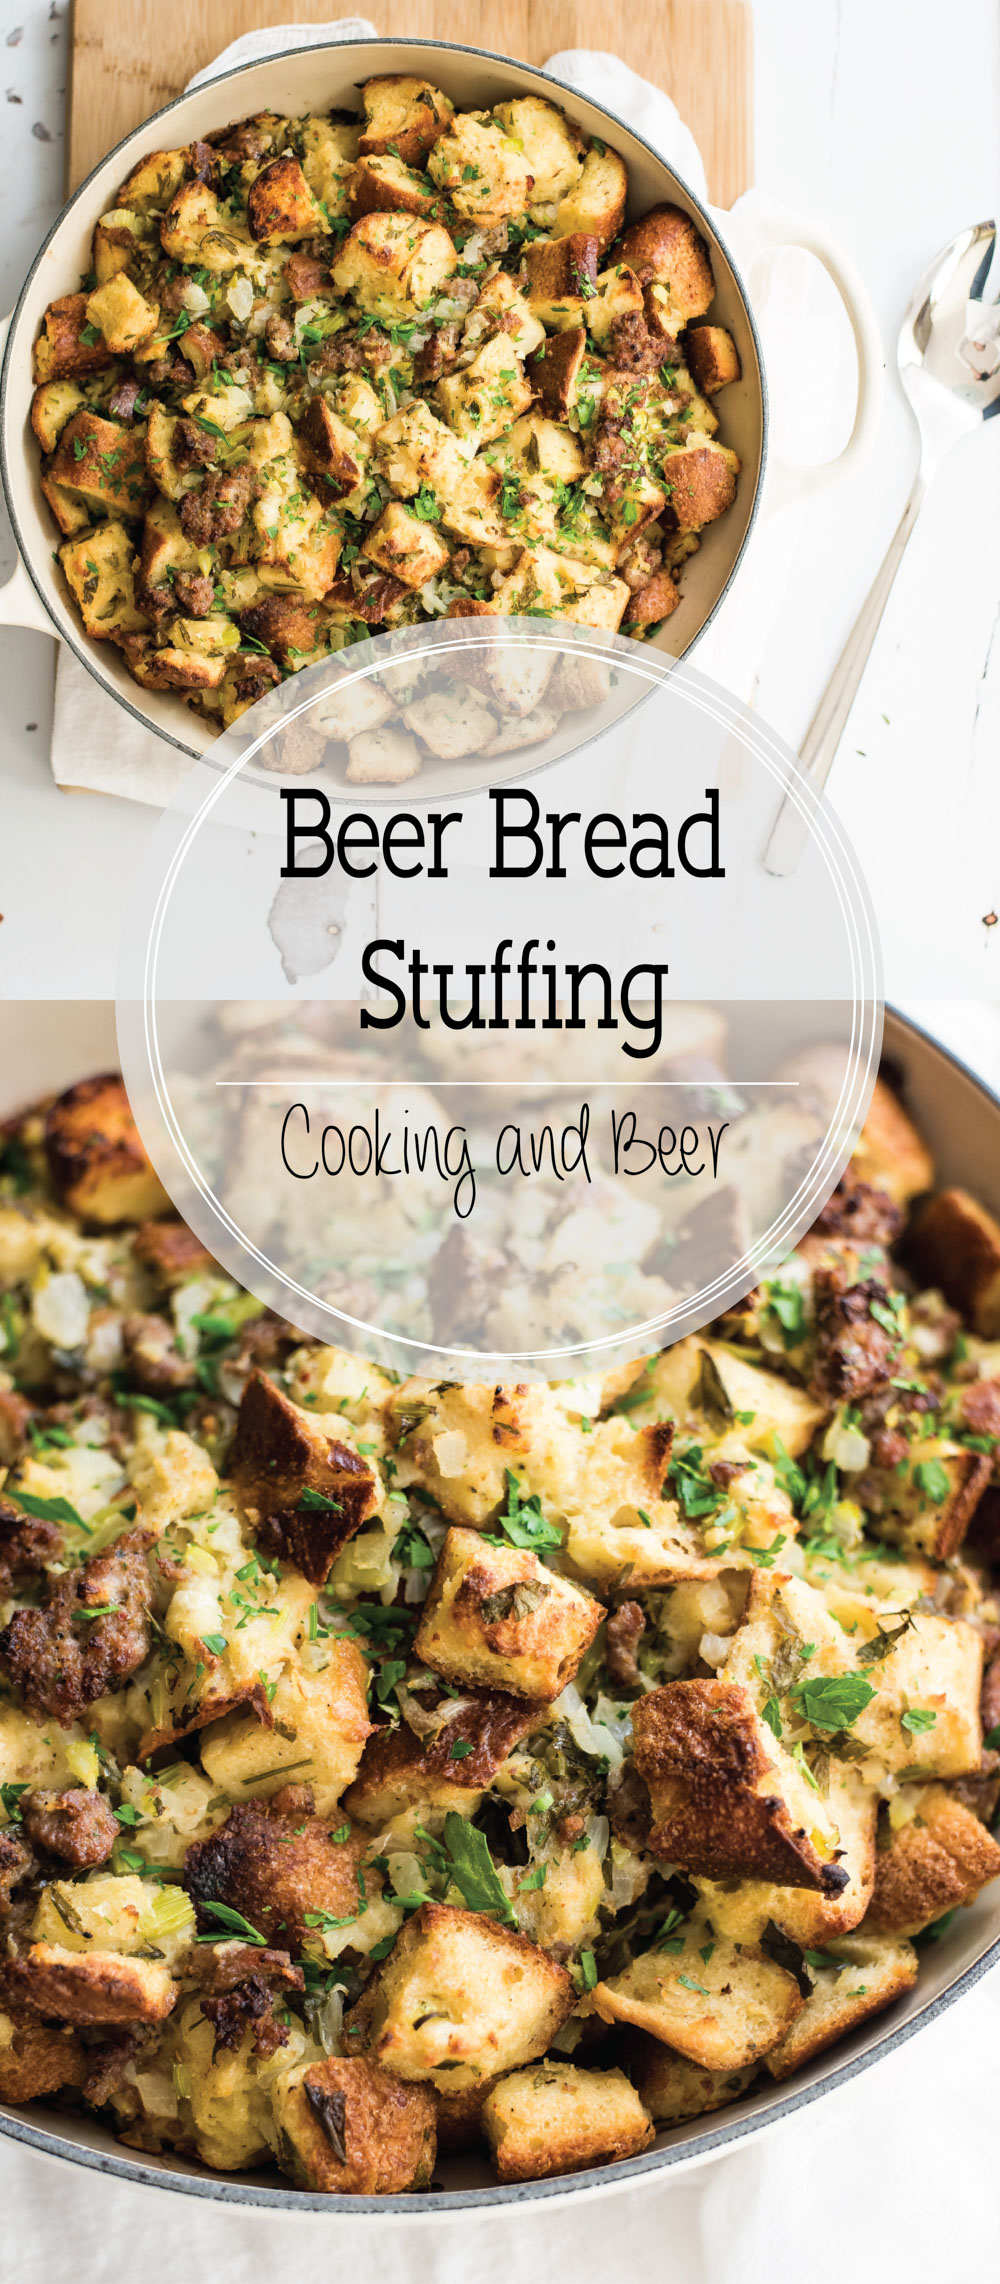 Take your Thanksgiving stuffing to the next level and use beer bread instead! It adds so much flavor and the end result can not be matched!